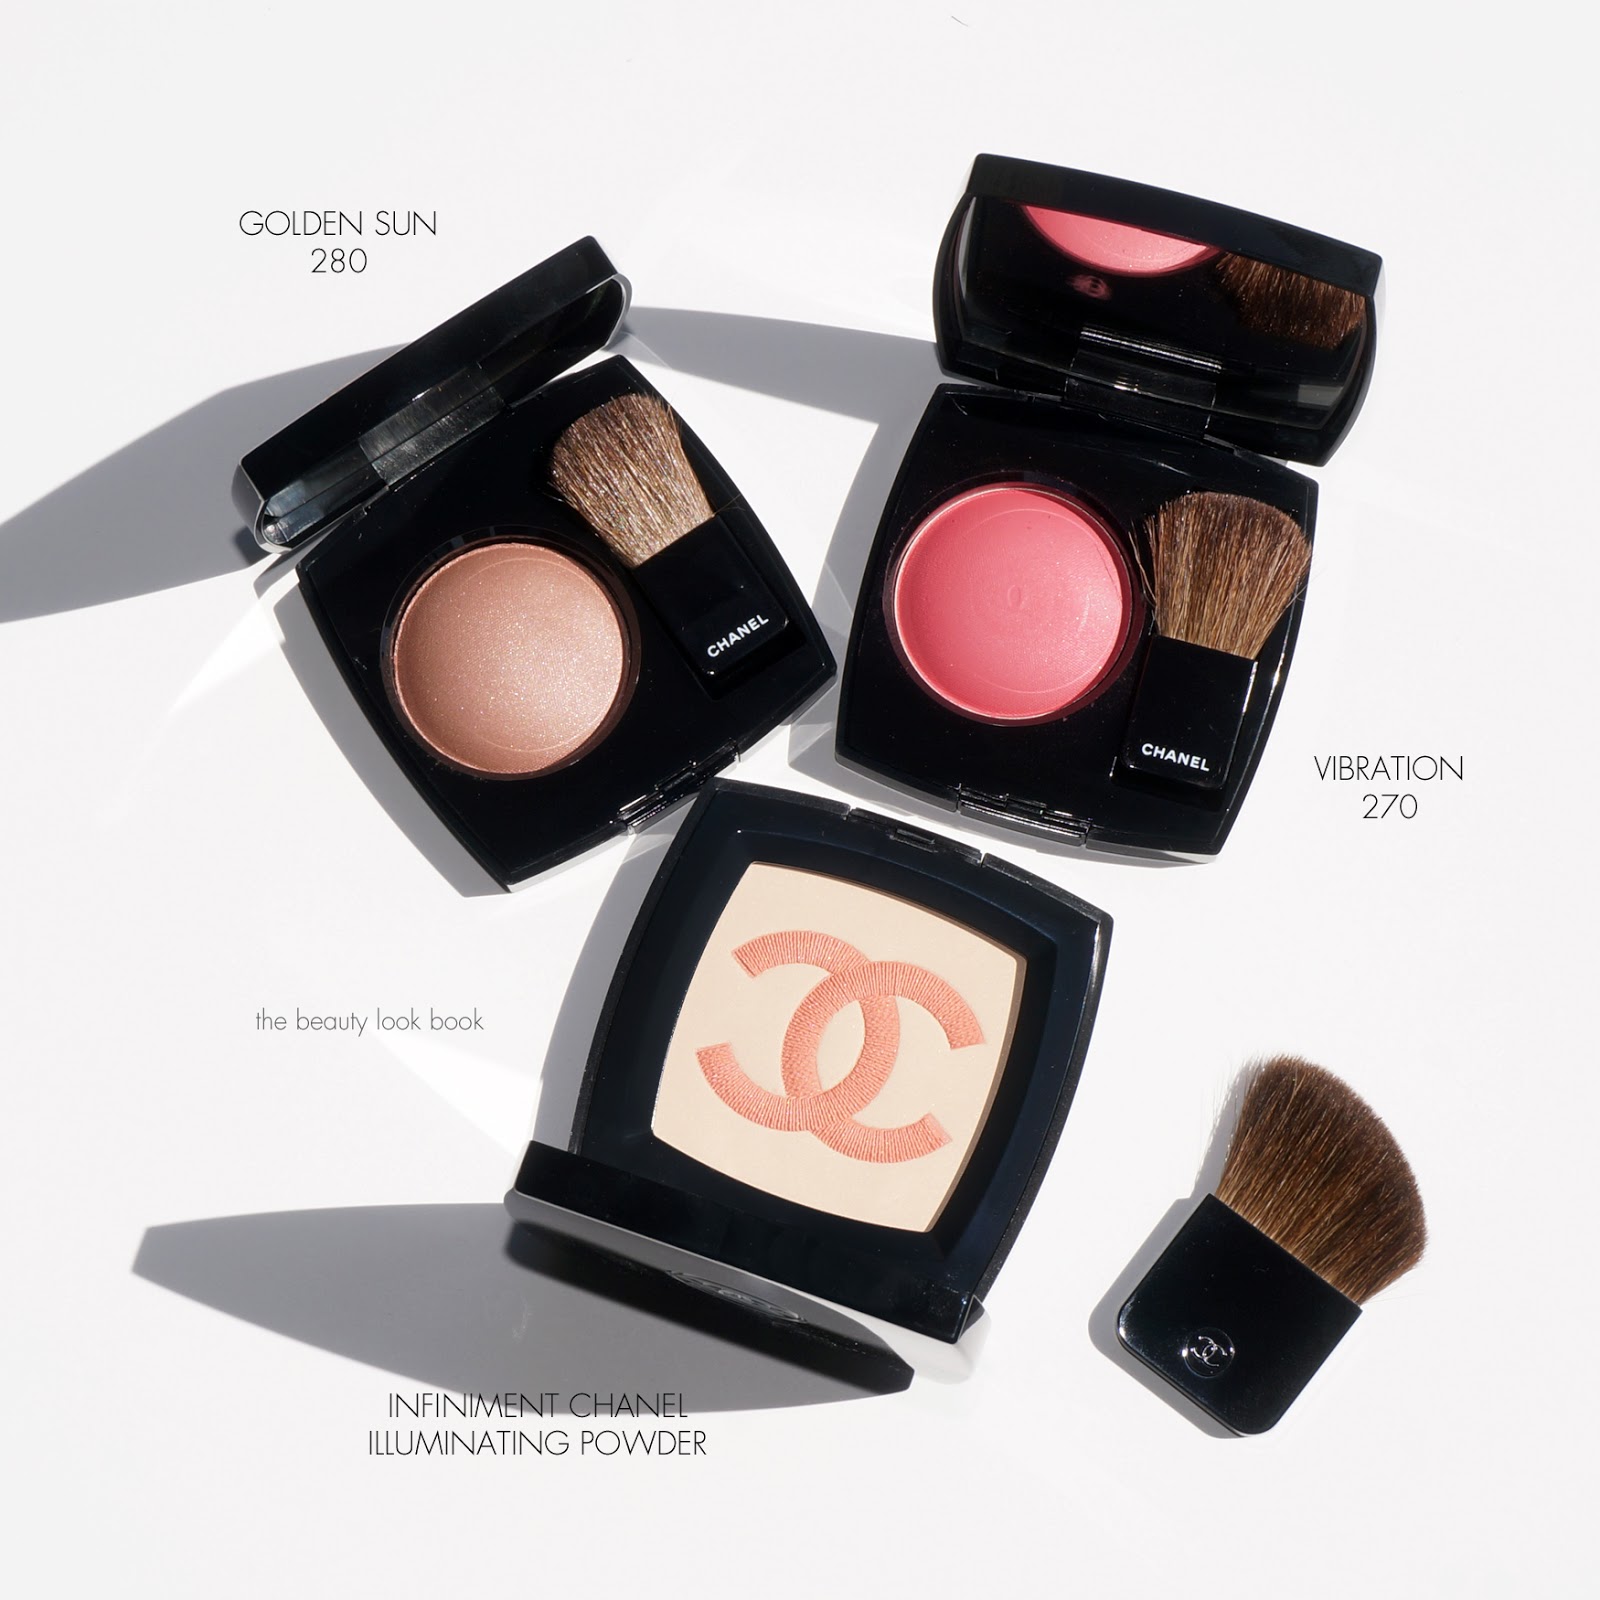 Chanel Joues Contraste Powder Blush in Golden Sun and Vibration and  Illuminating Powder Infiniment Chanel - The Beauty Look Book